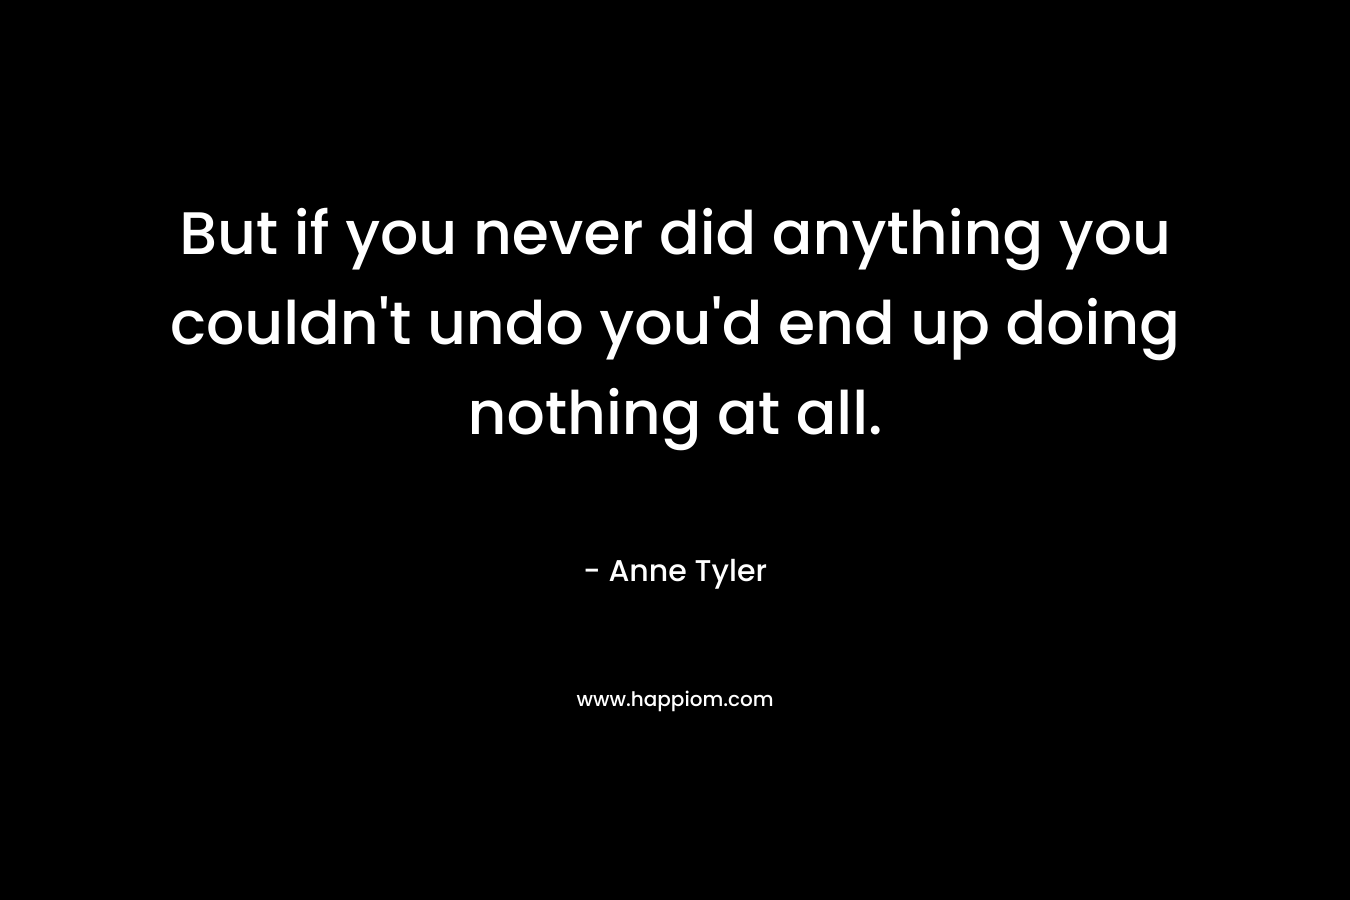 But if you never did anything you couldn’t undo you’d end up doing nothing at all. – Anne Tyler